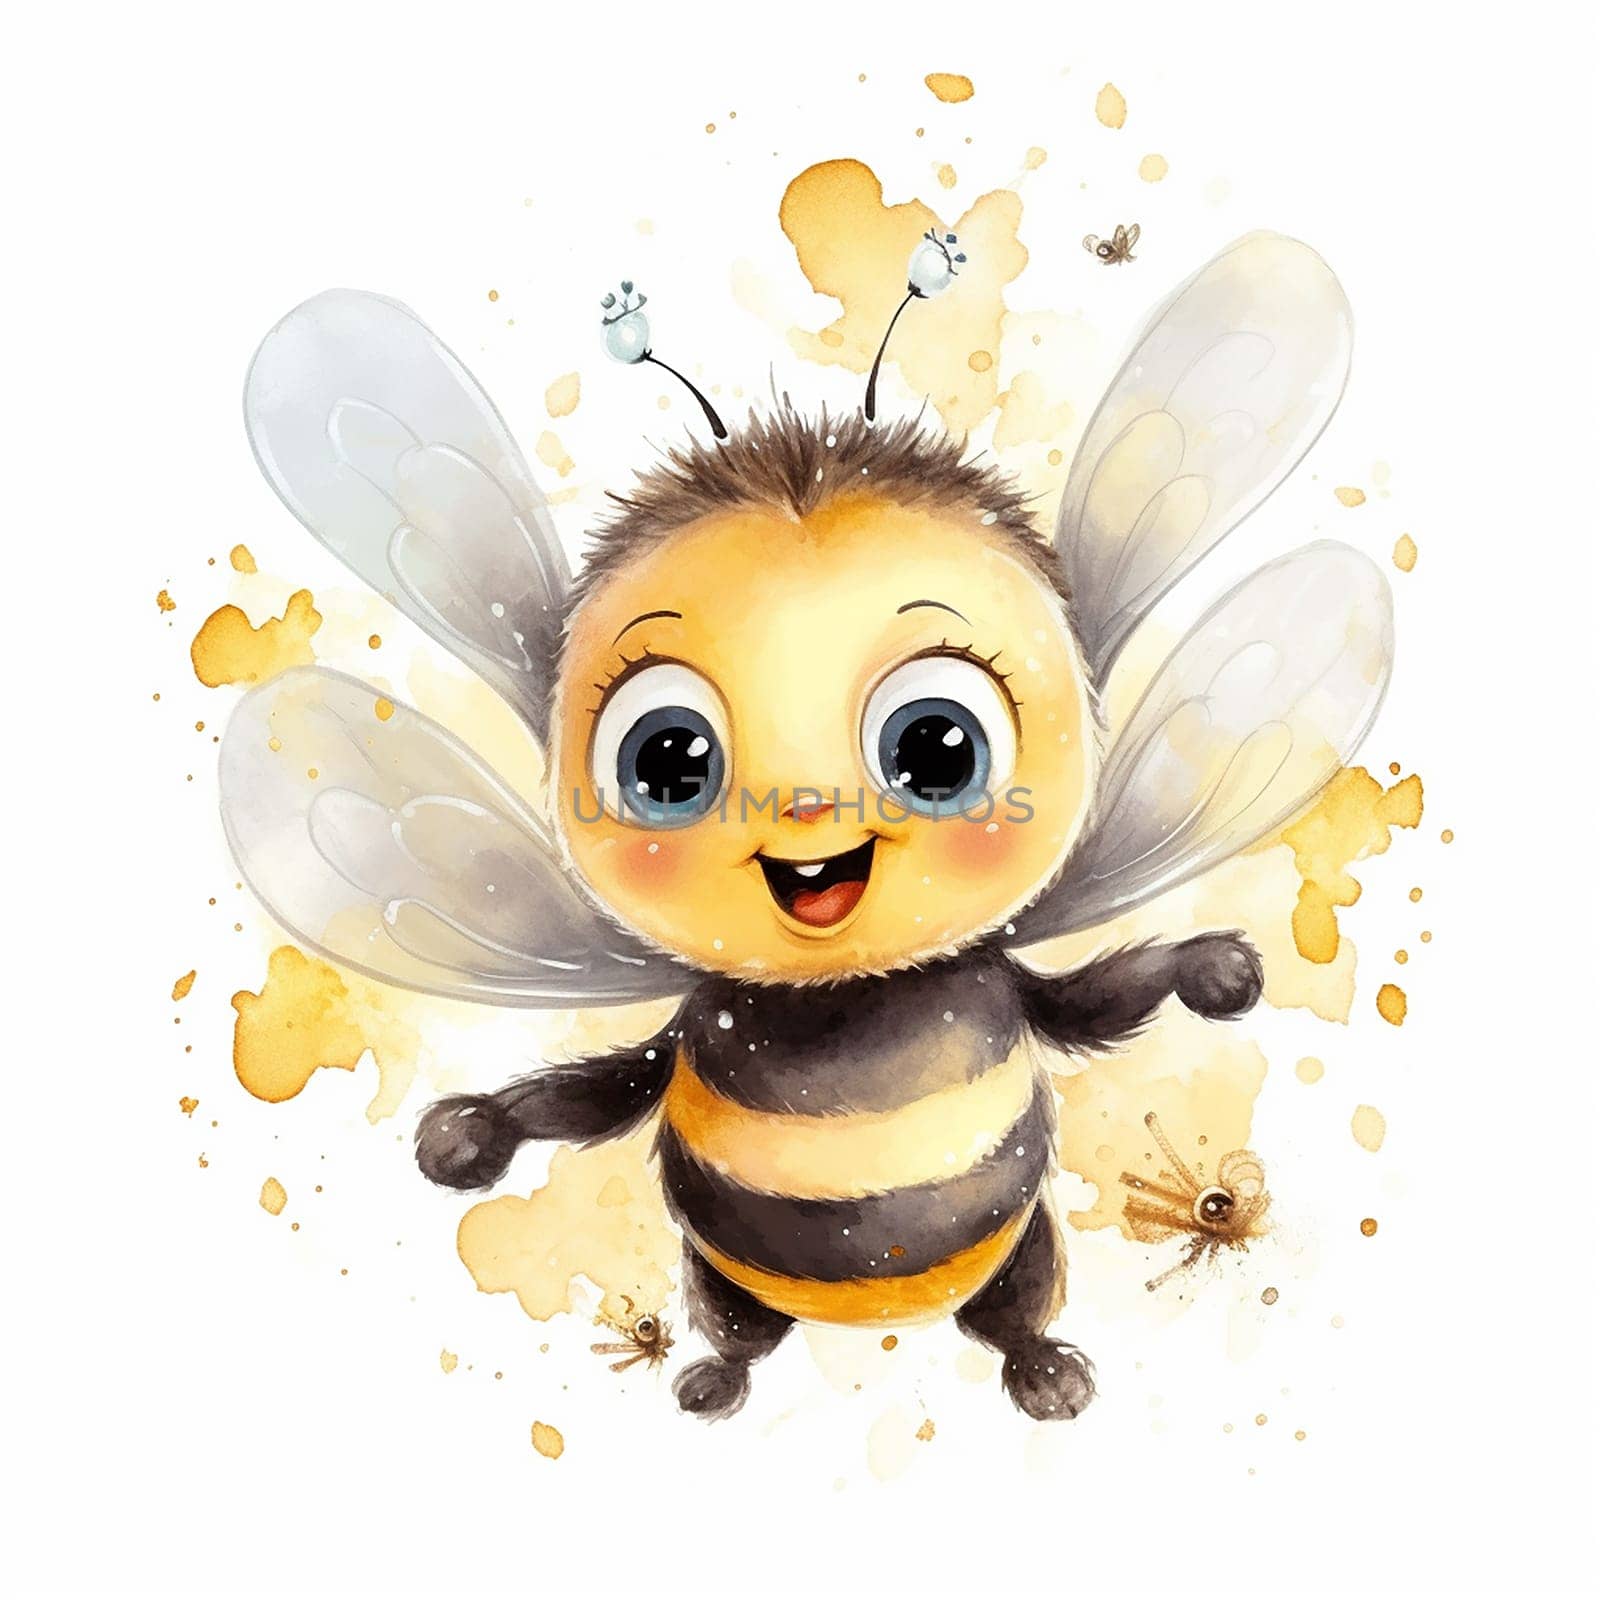 An artistic illustration of a bee with watercolor style on white background by Hype2art